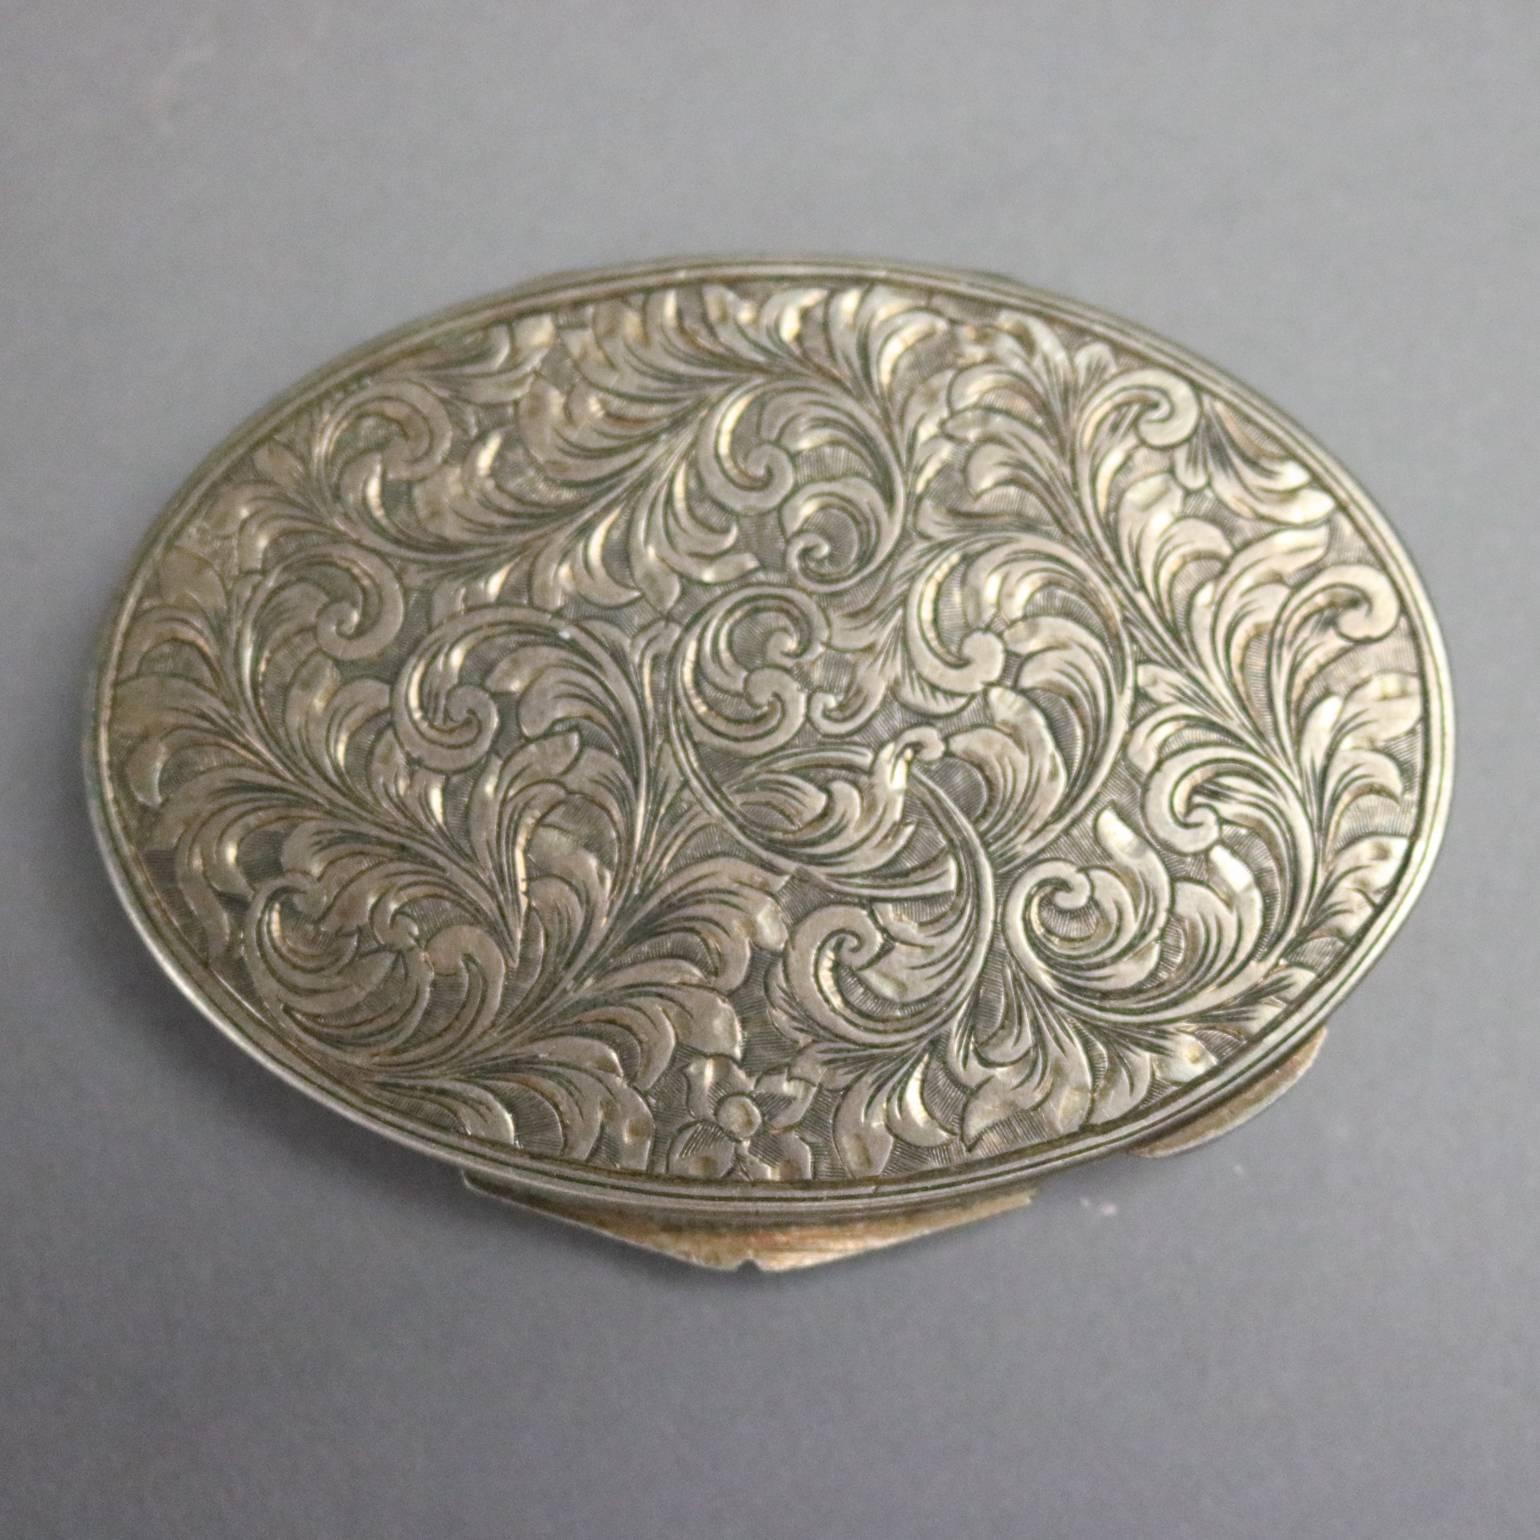 19th Century Antique Continental Hand Enameled Silver Compact with Scene of Celebration